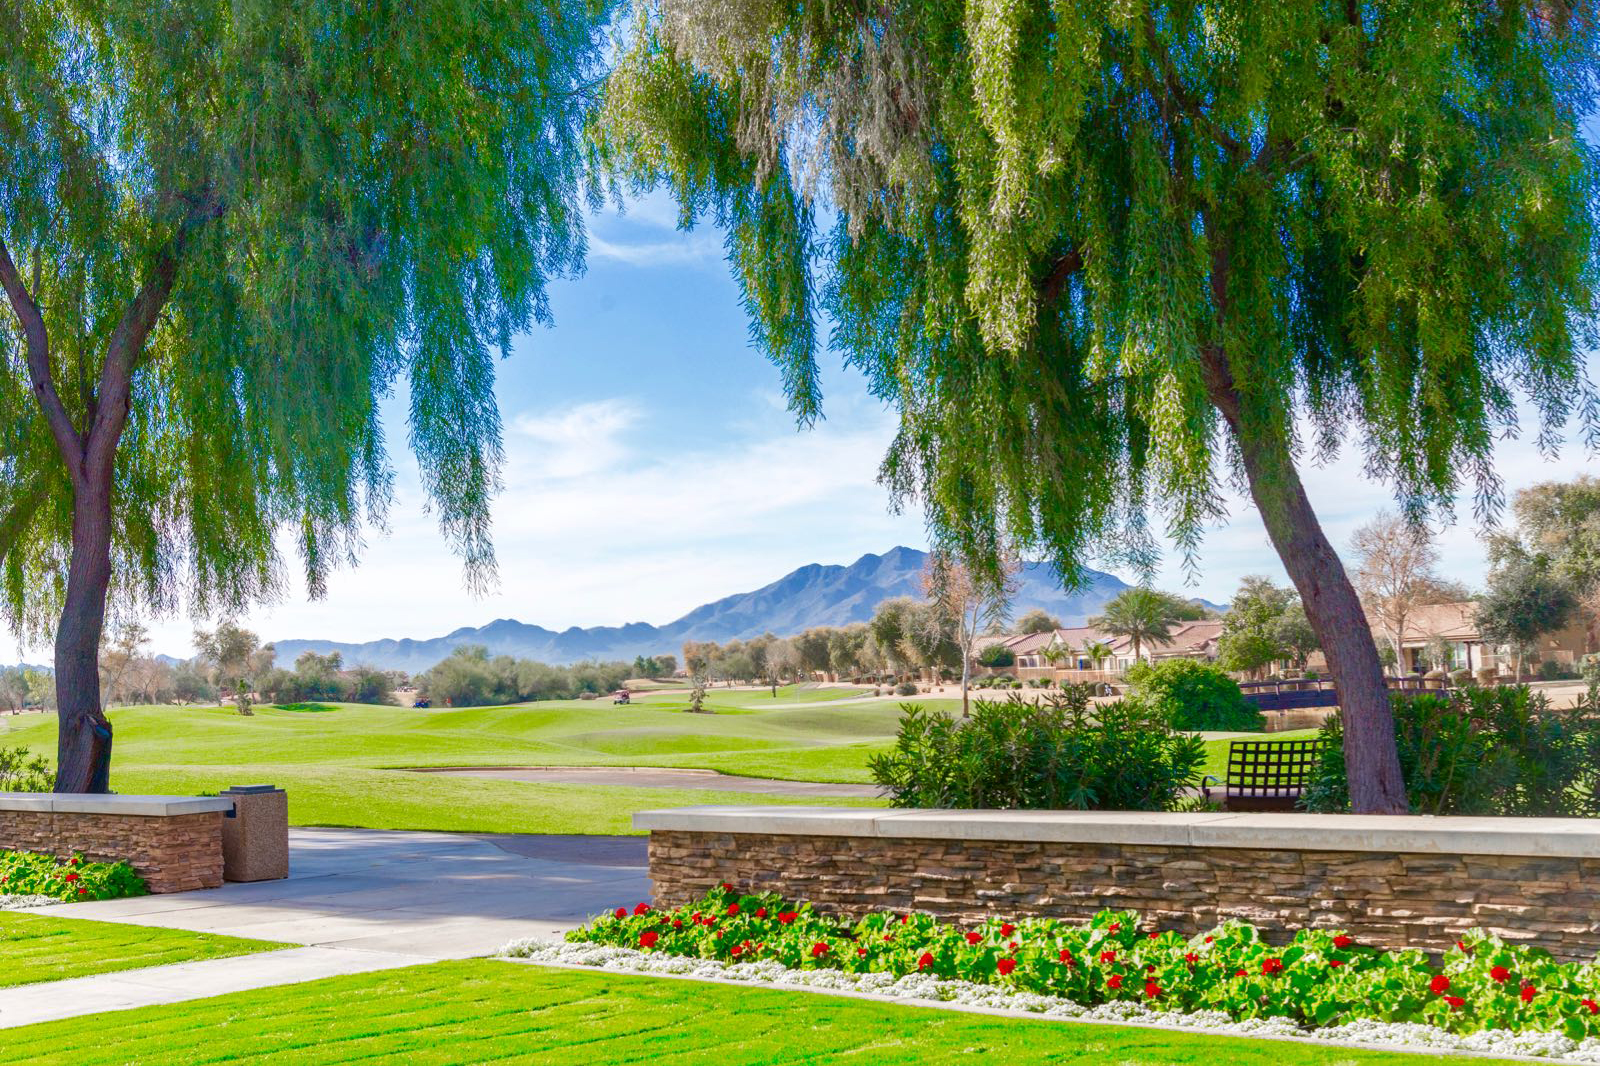 Trilogy Golf Club located in the master-planned community of Power Ranch of Gilbert, AZ